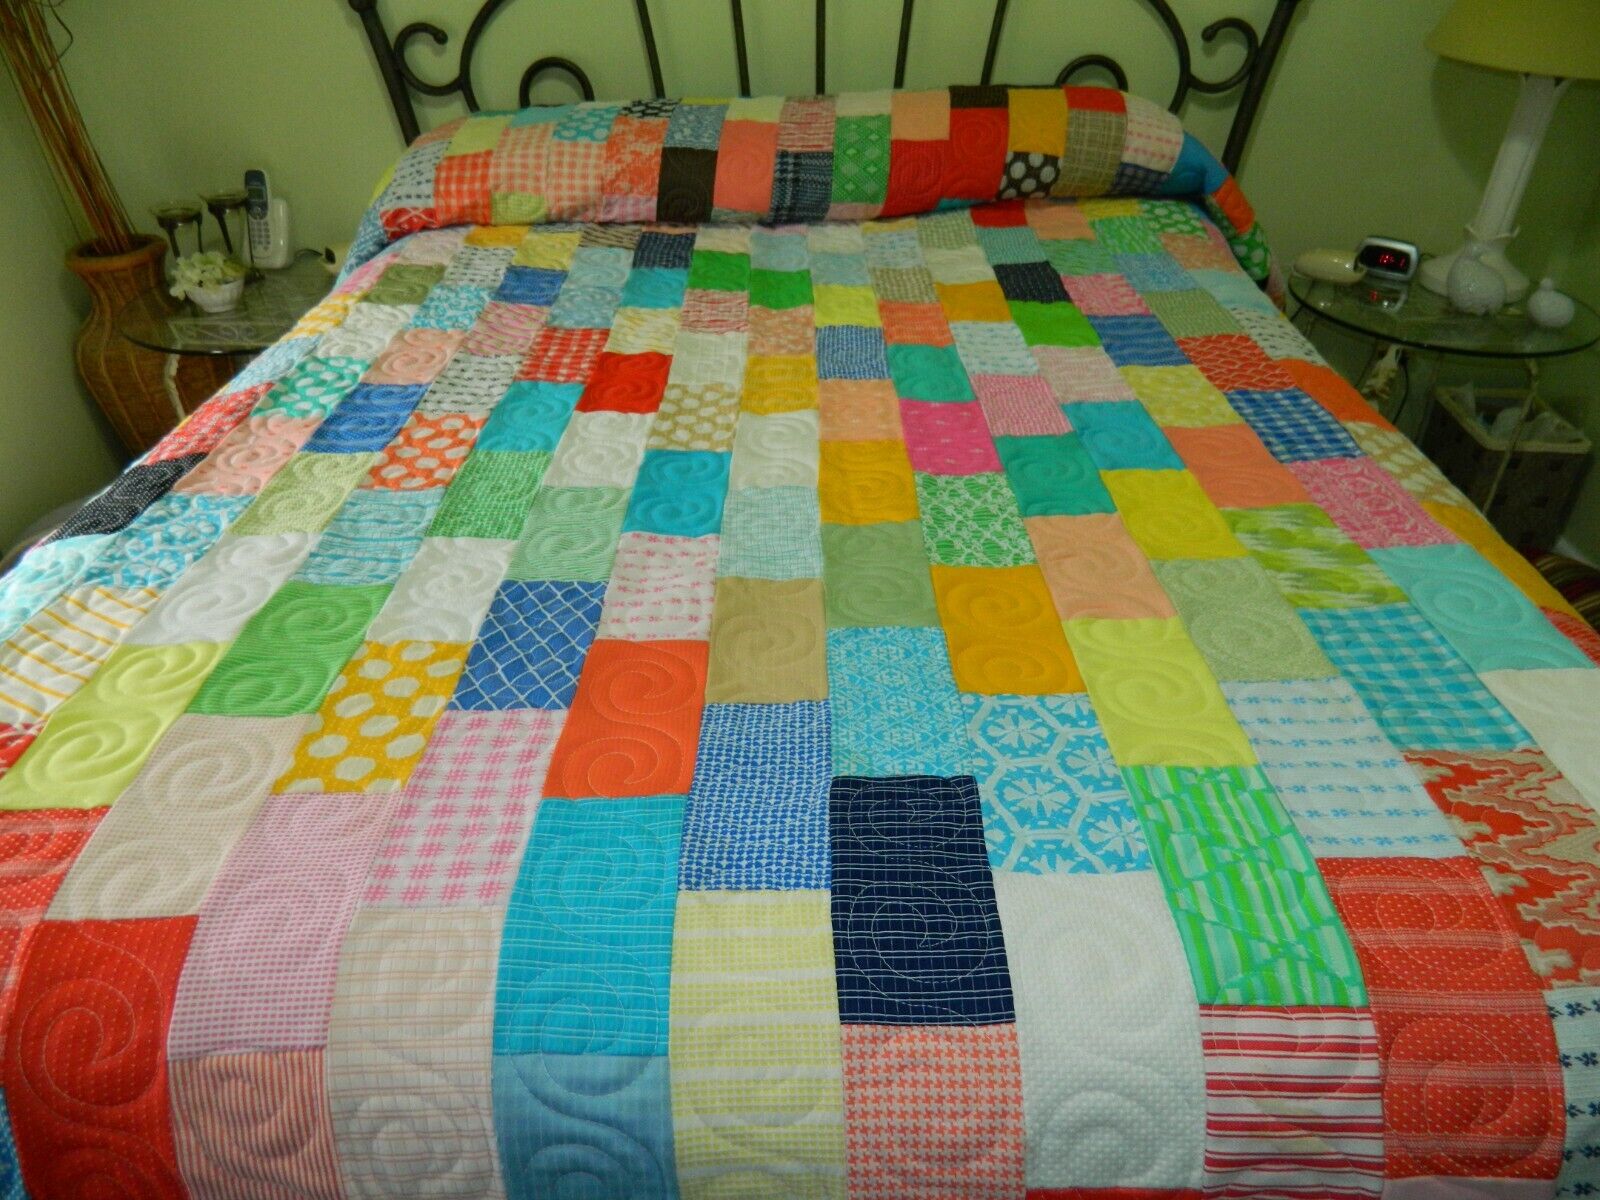 L-24 VINTAGE HAND CRAFTED FRINGED DOUBLE KNIT PATCHWORK BEDSPREAD/QUILT KING